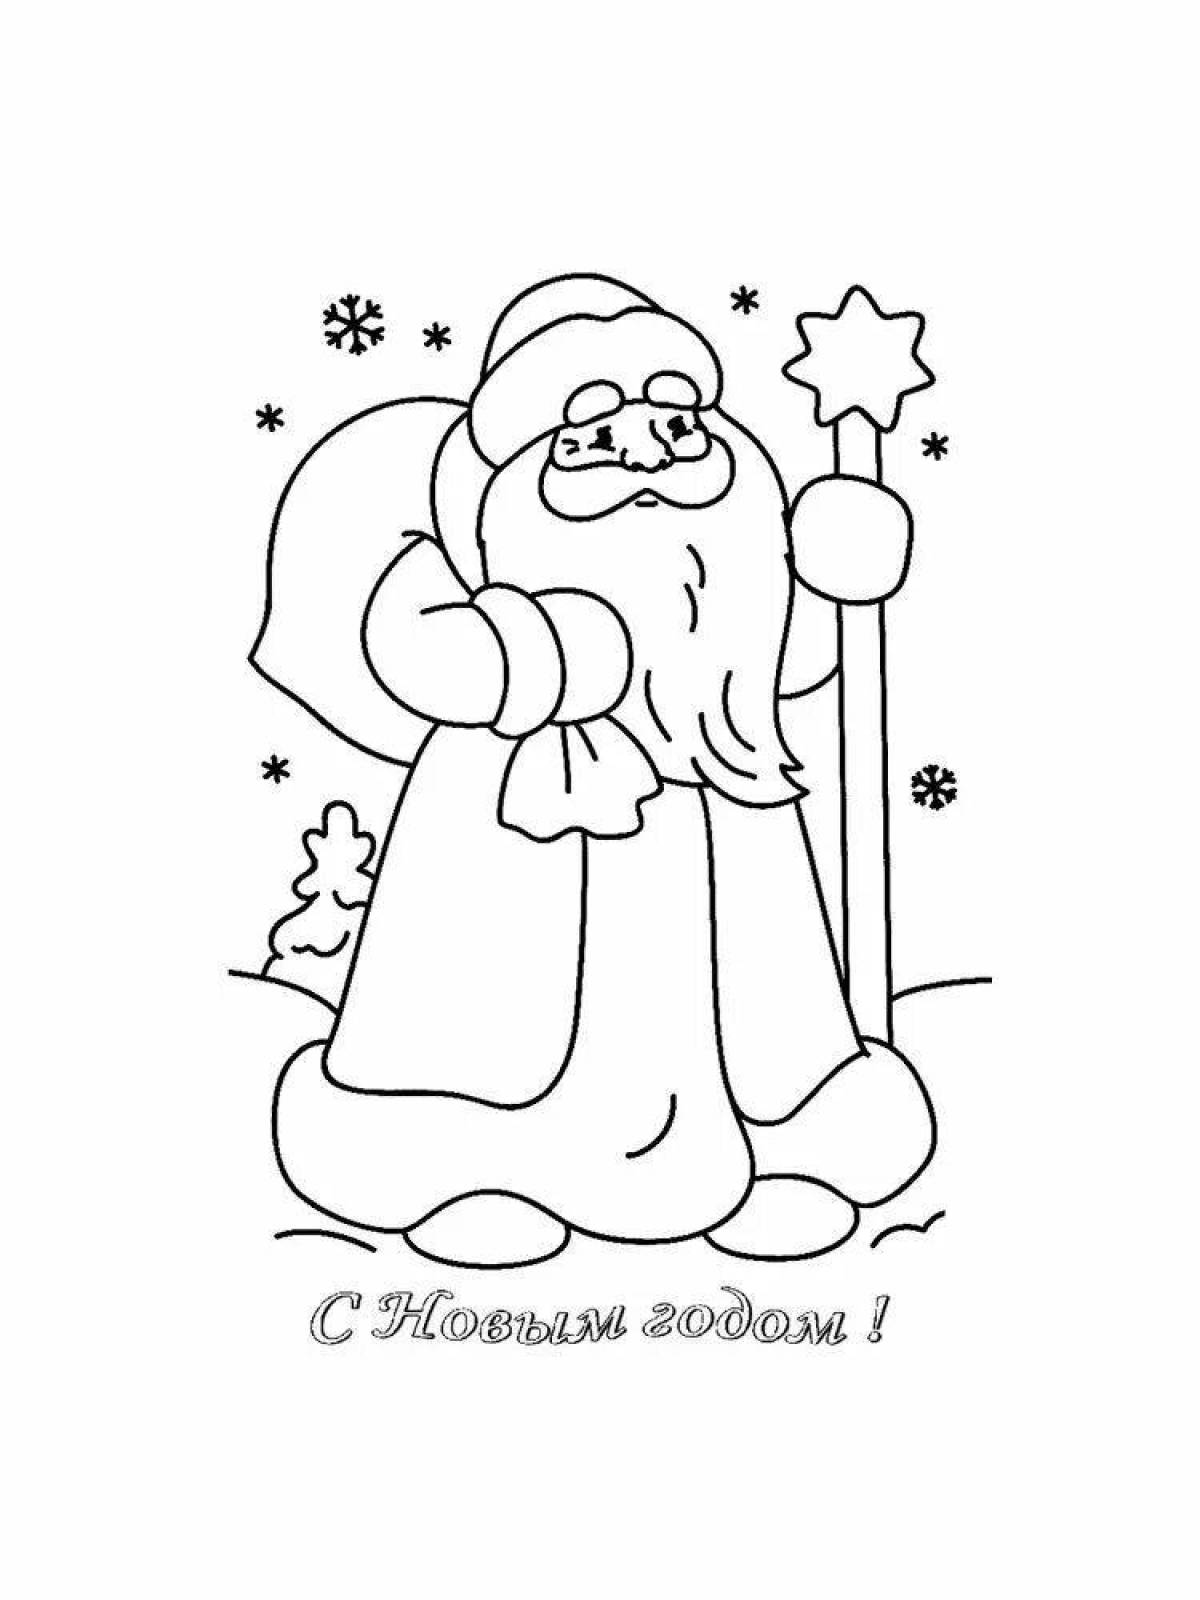 Glitter santa claus coloring book for kids